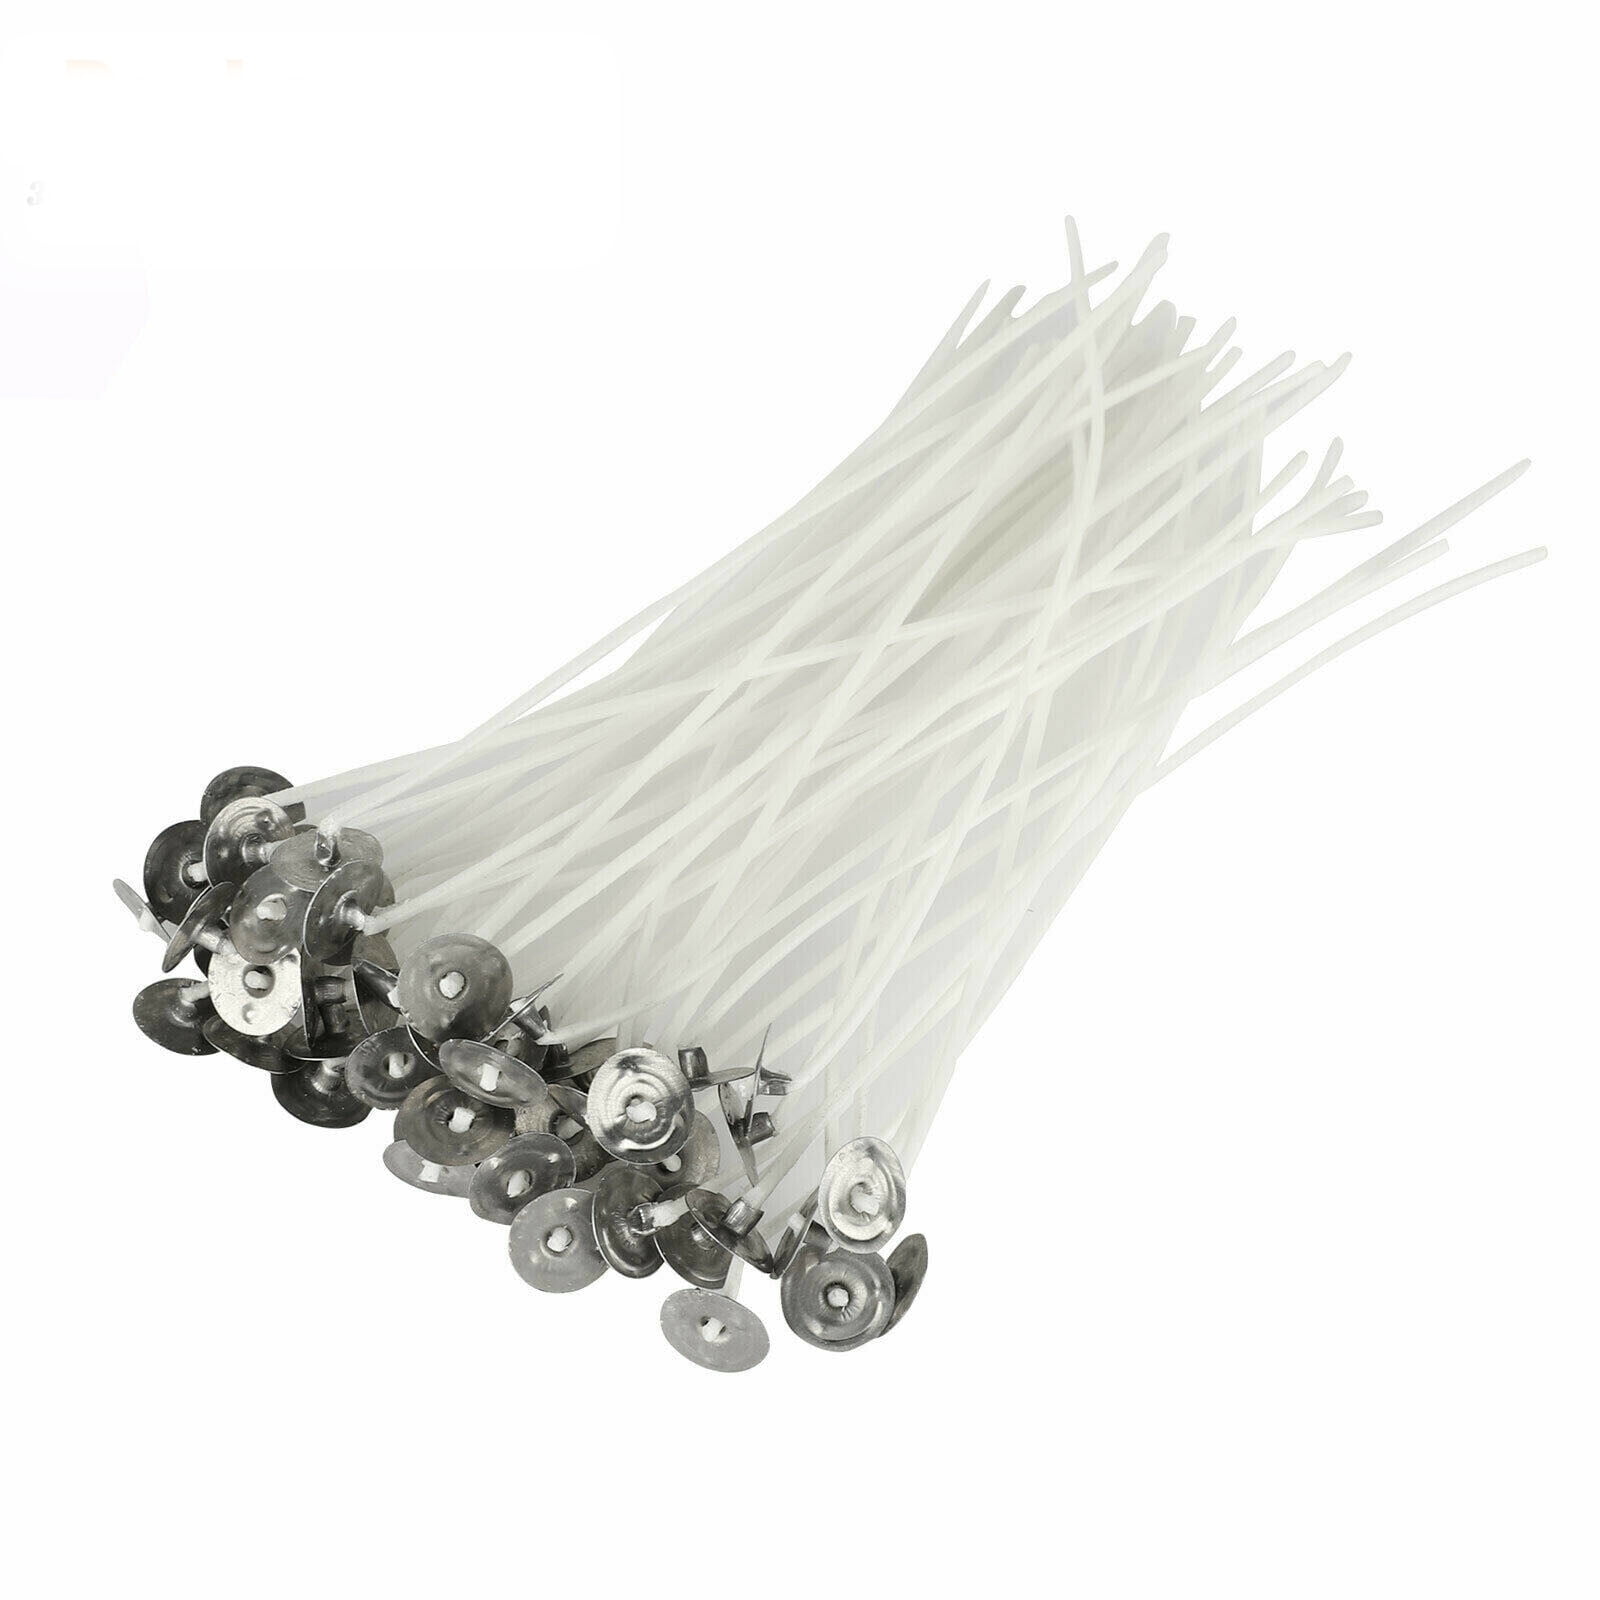 Pre Waxed Candle Wicks With Long Tabbed Cotton Sustainer For Candle Making  Craft